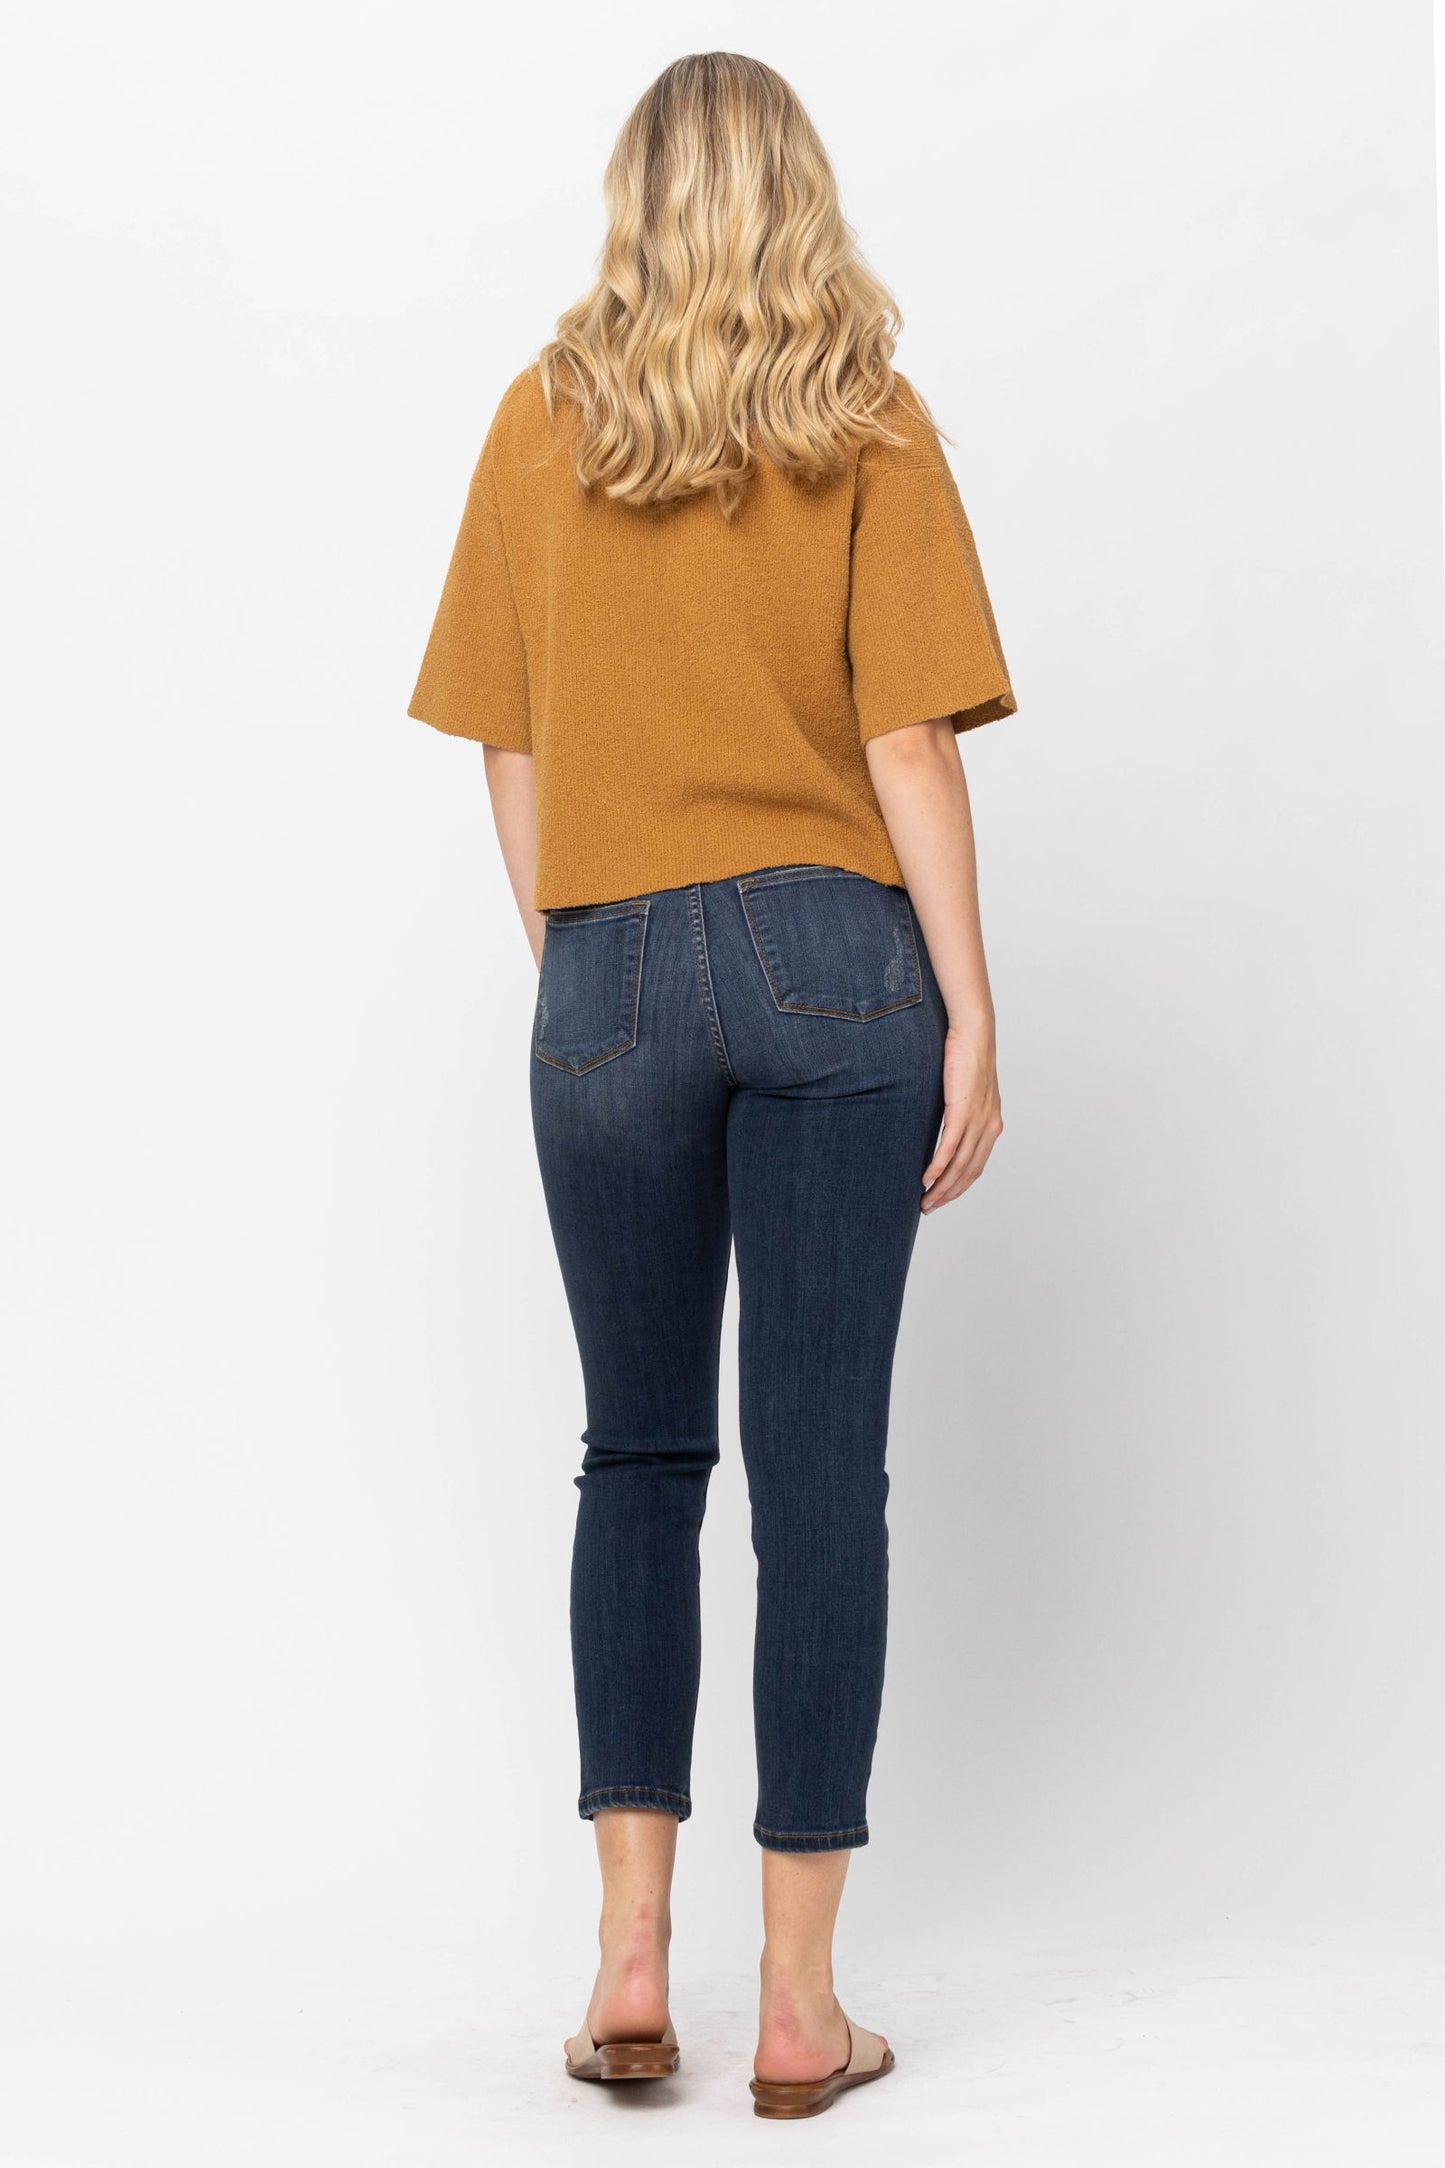 JUDY BLUE® MID-RISE CROPPED RELAXED FIT